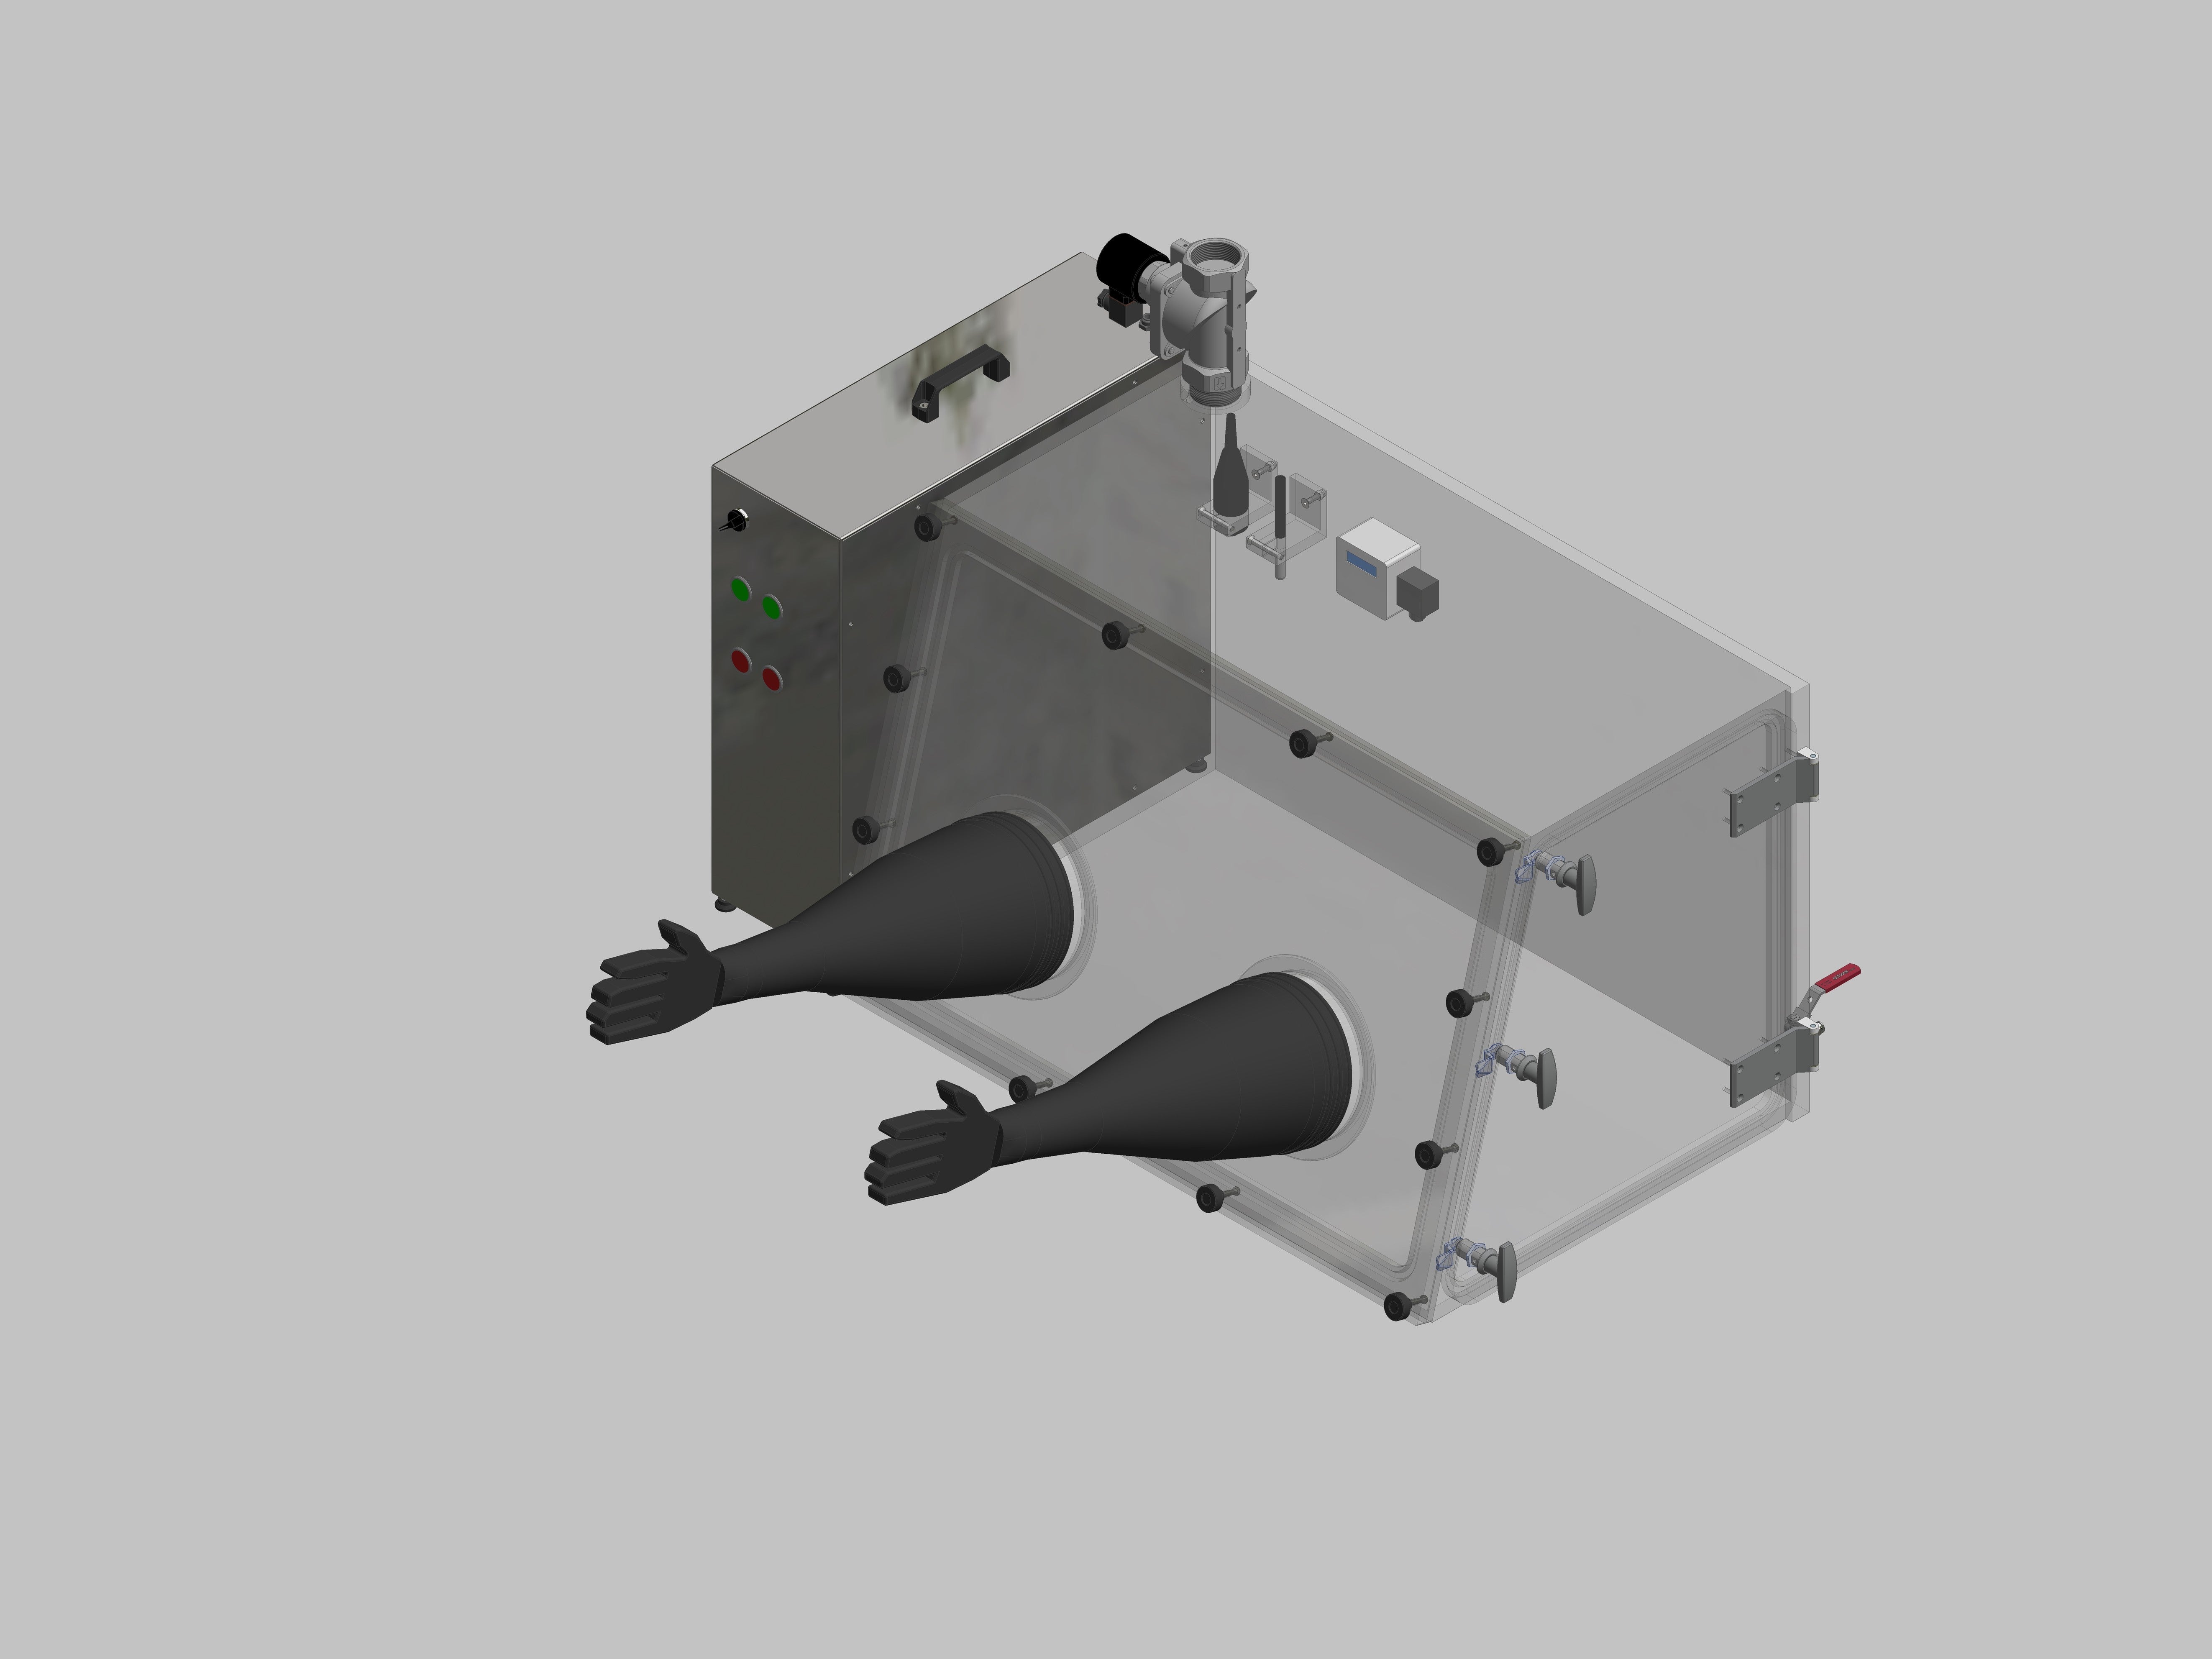 Glovebox made of acrylic &gt; Gas filling: automatic flushing with pressure control, front design: removable, side design: hinged doors, control: oxygen and humidity regulator